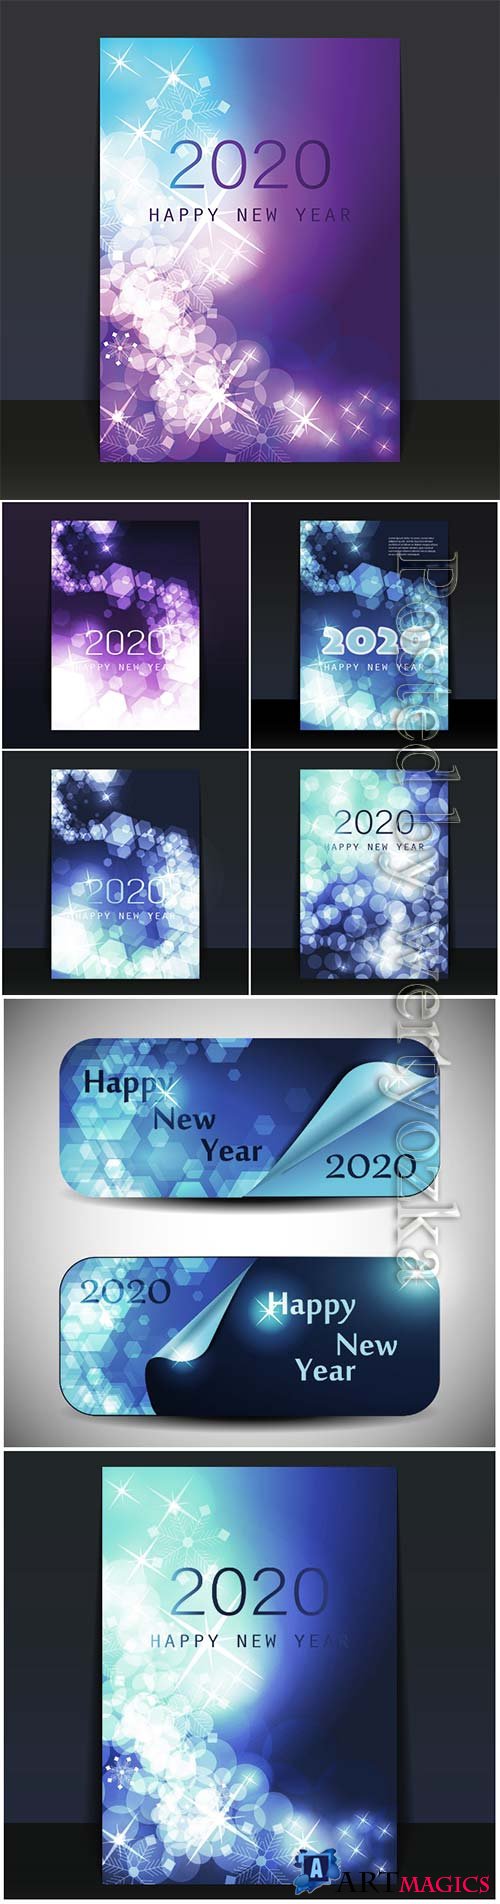 New Year Card 2020, flyer or cover vector design